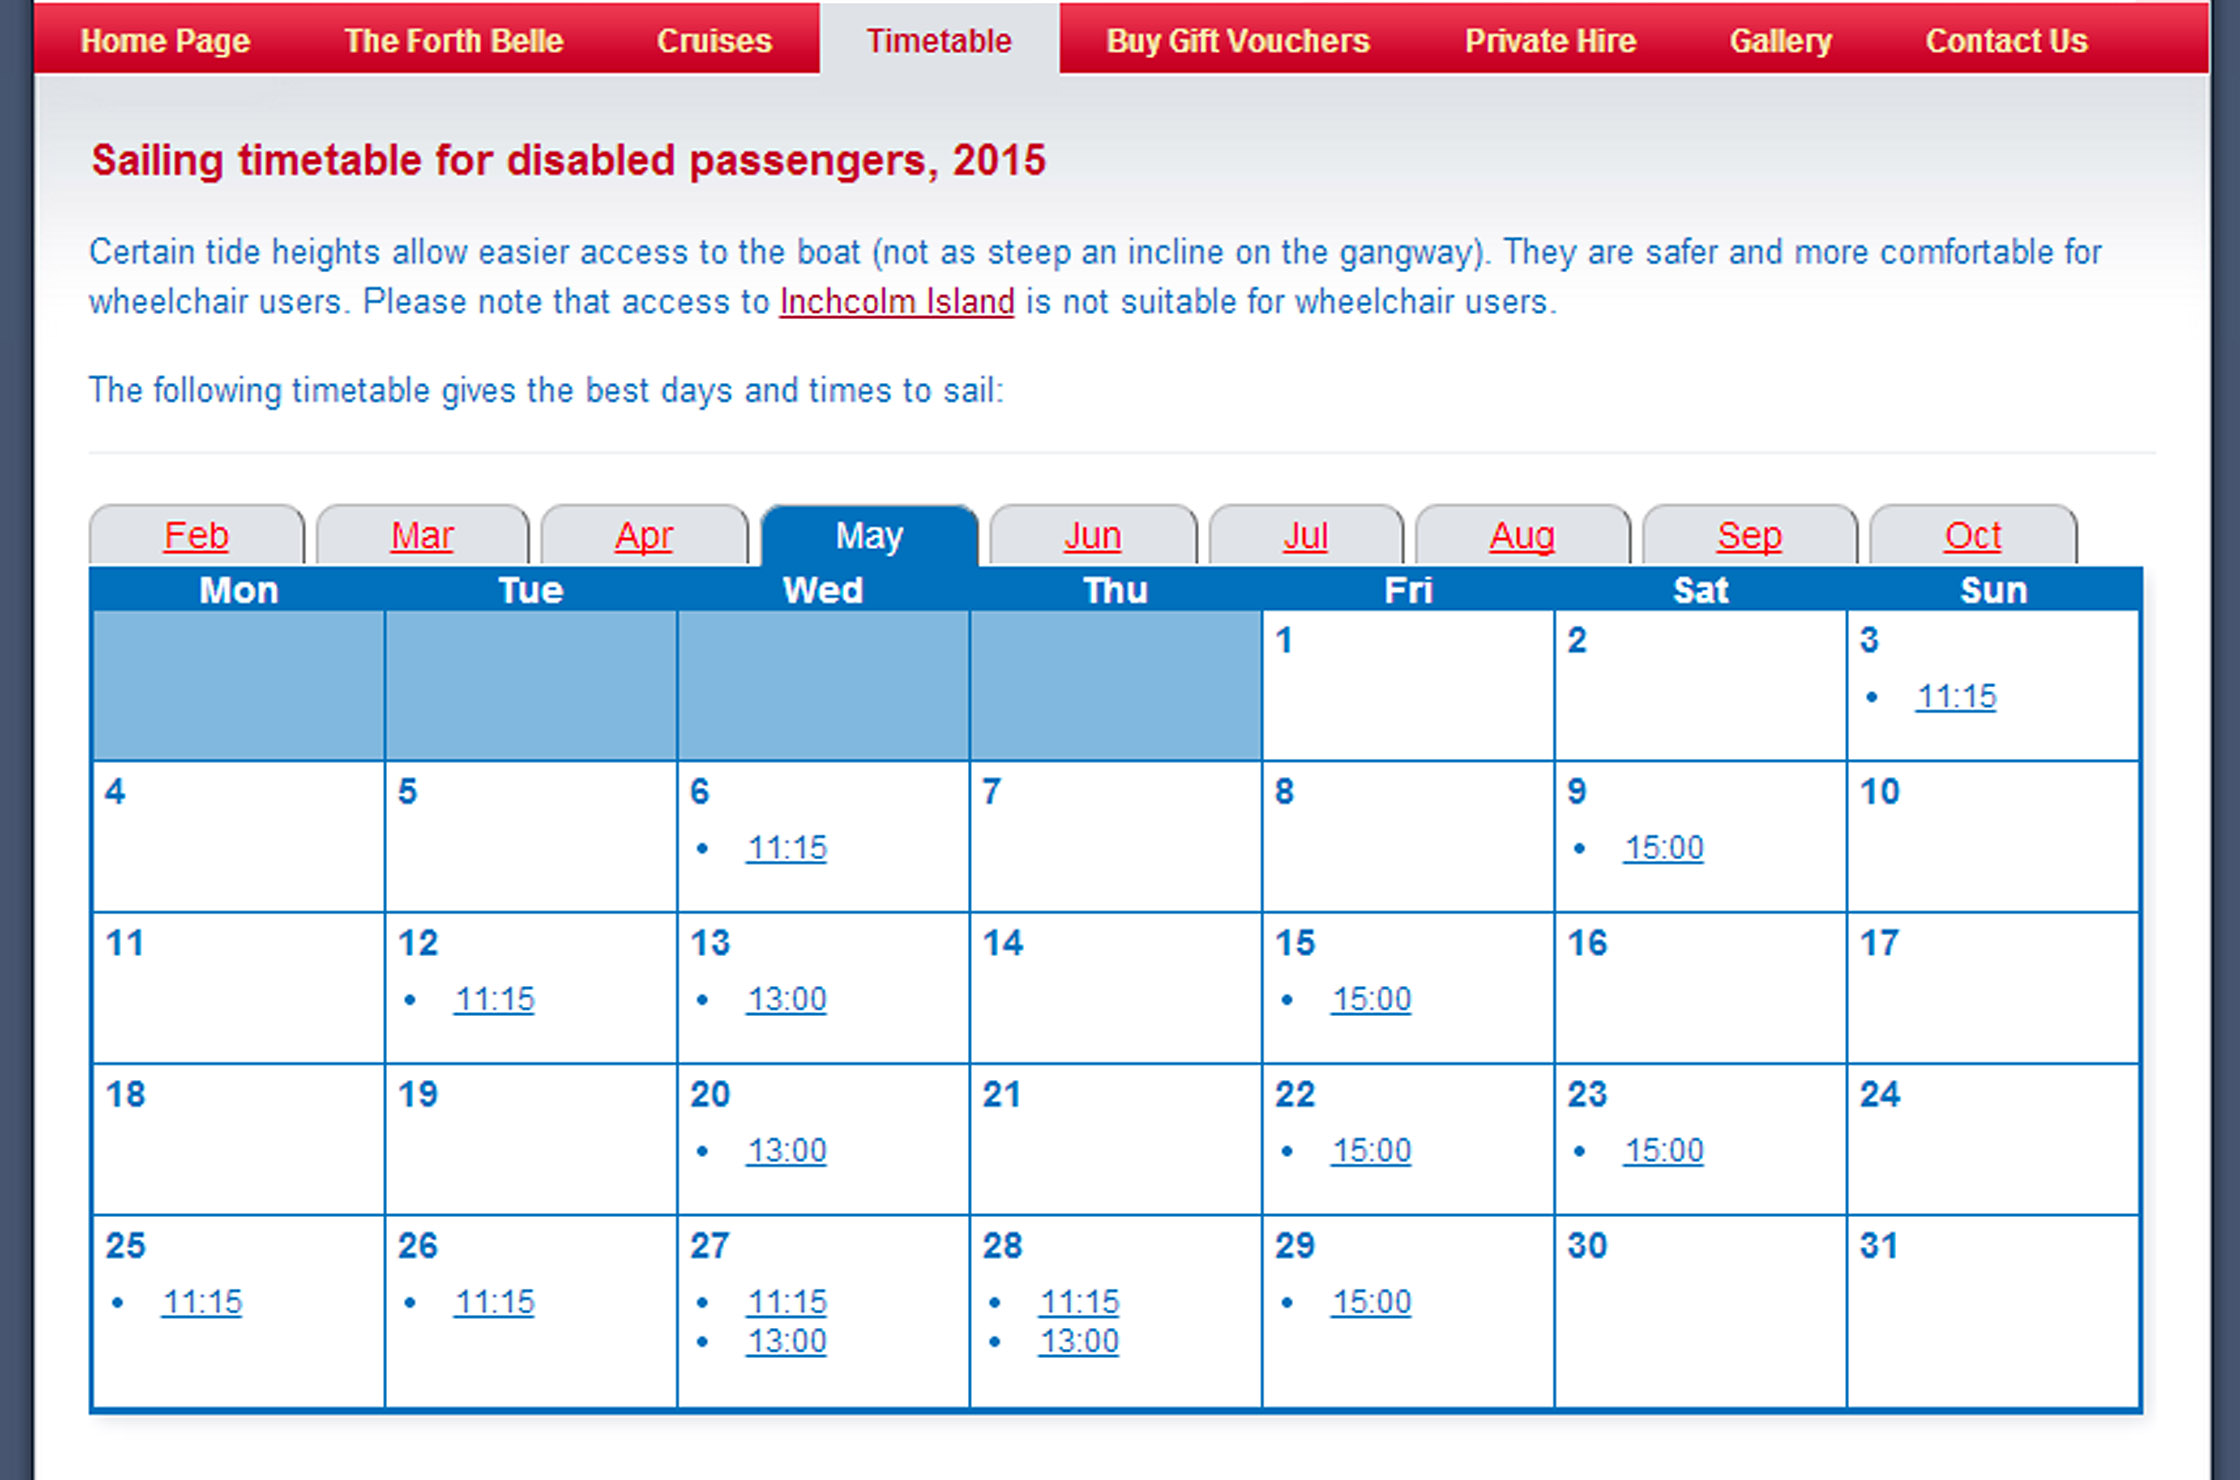 The disabled timetable